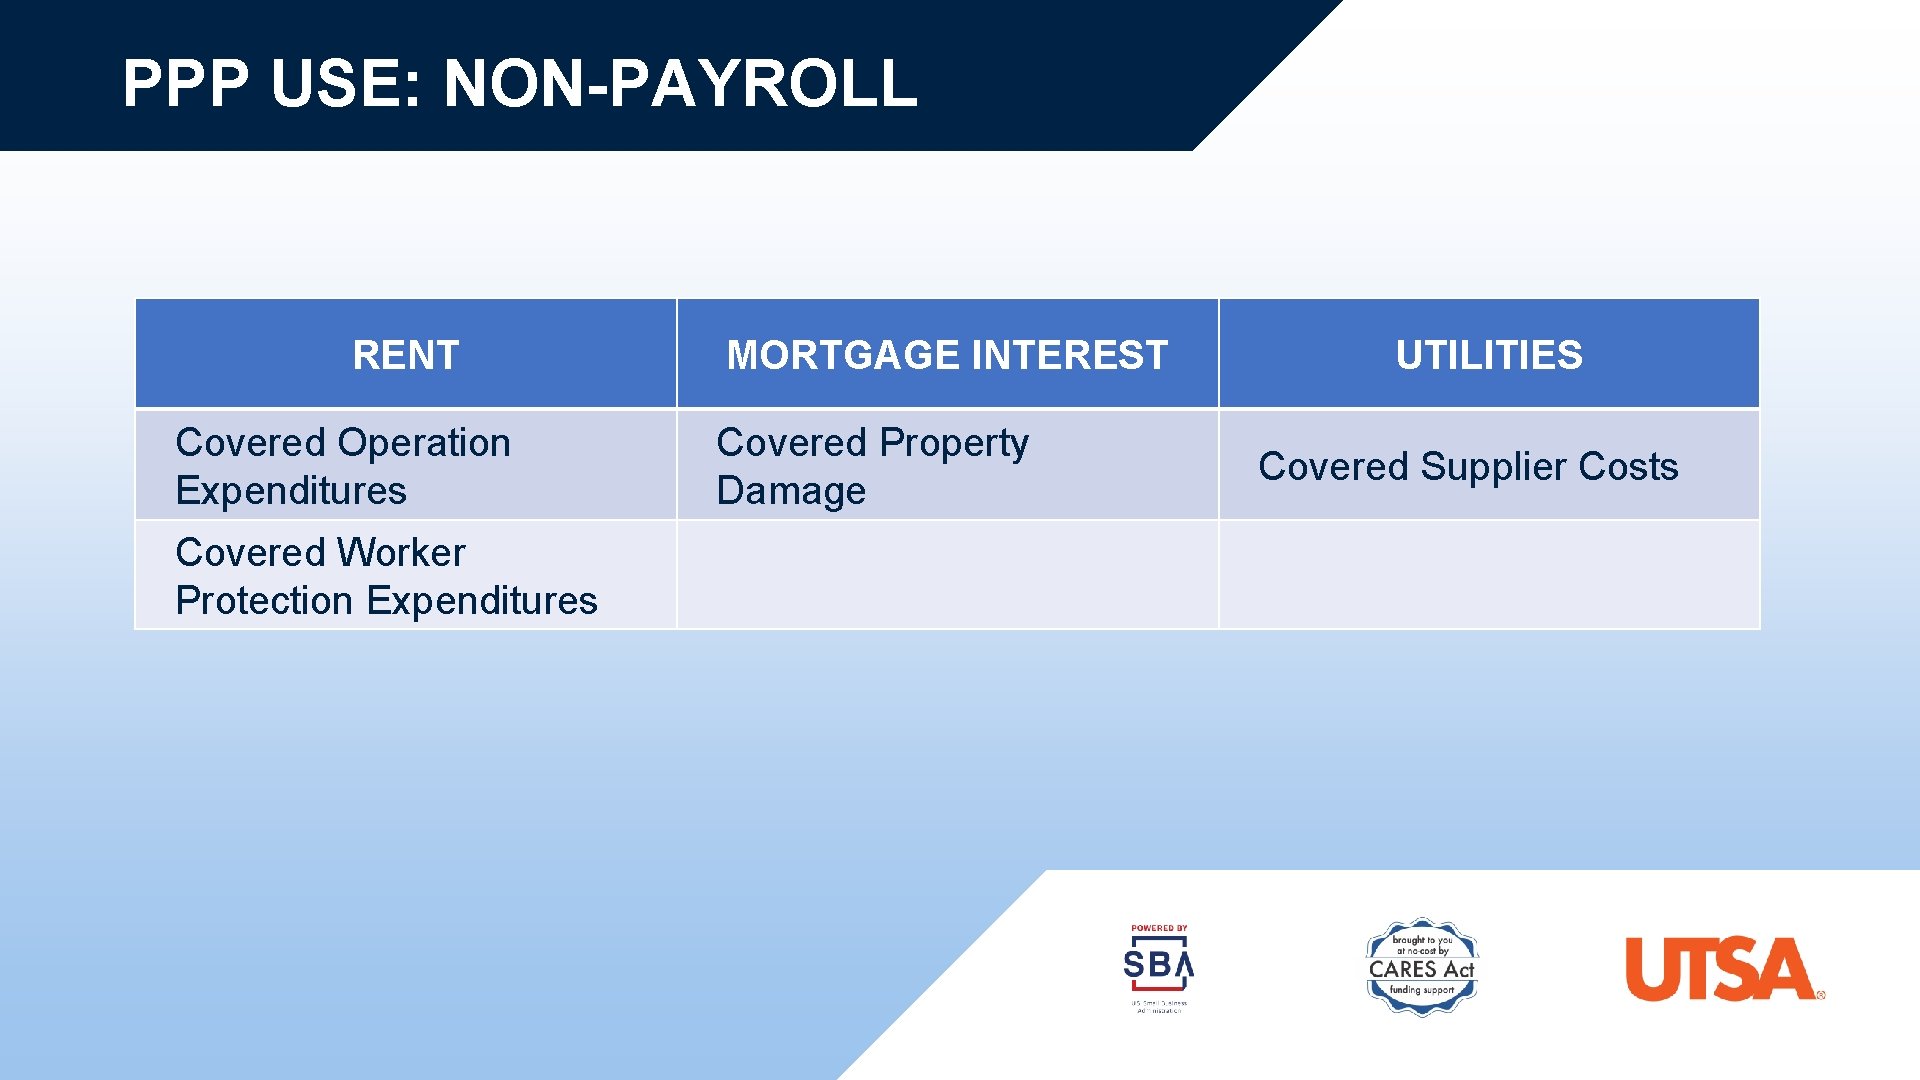 PPP USE: NON-PAYROLL RENT Covered Operation Expenditures Covered Worker Protection Expenditures MORTGAGE INTEREST Covered